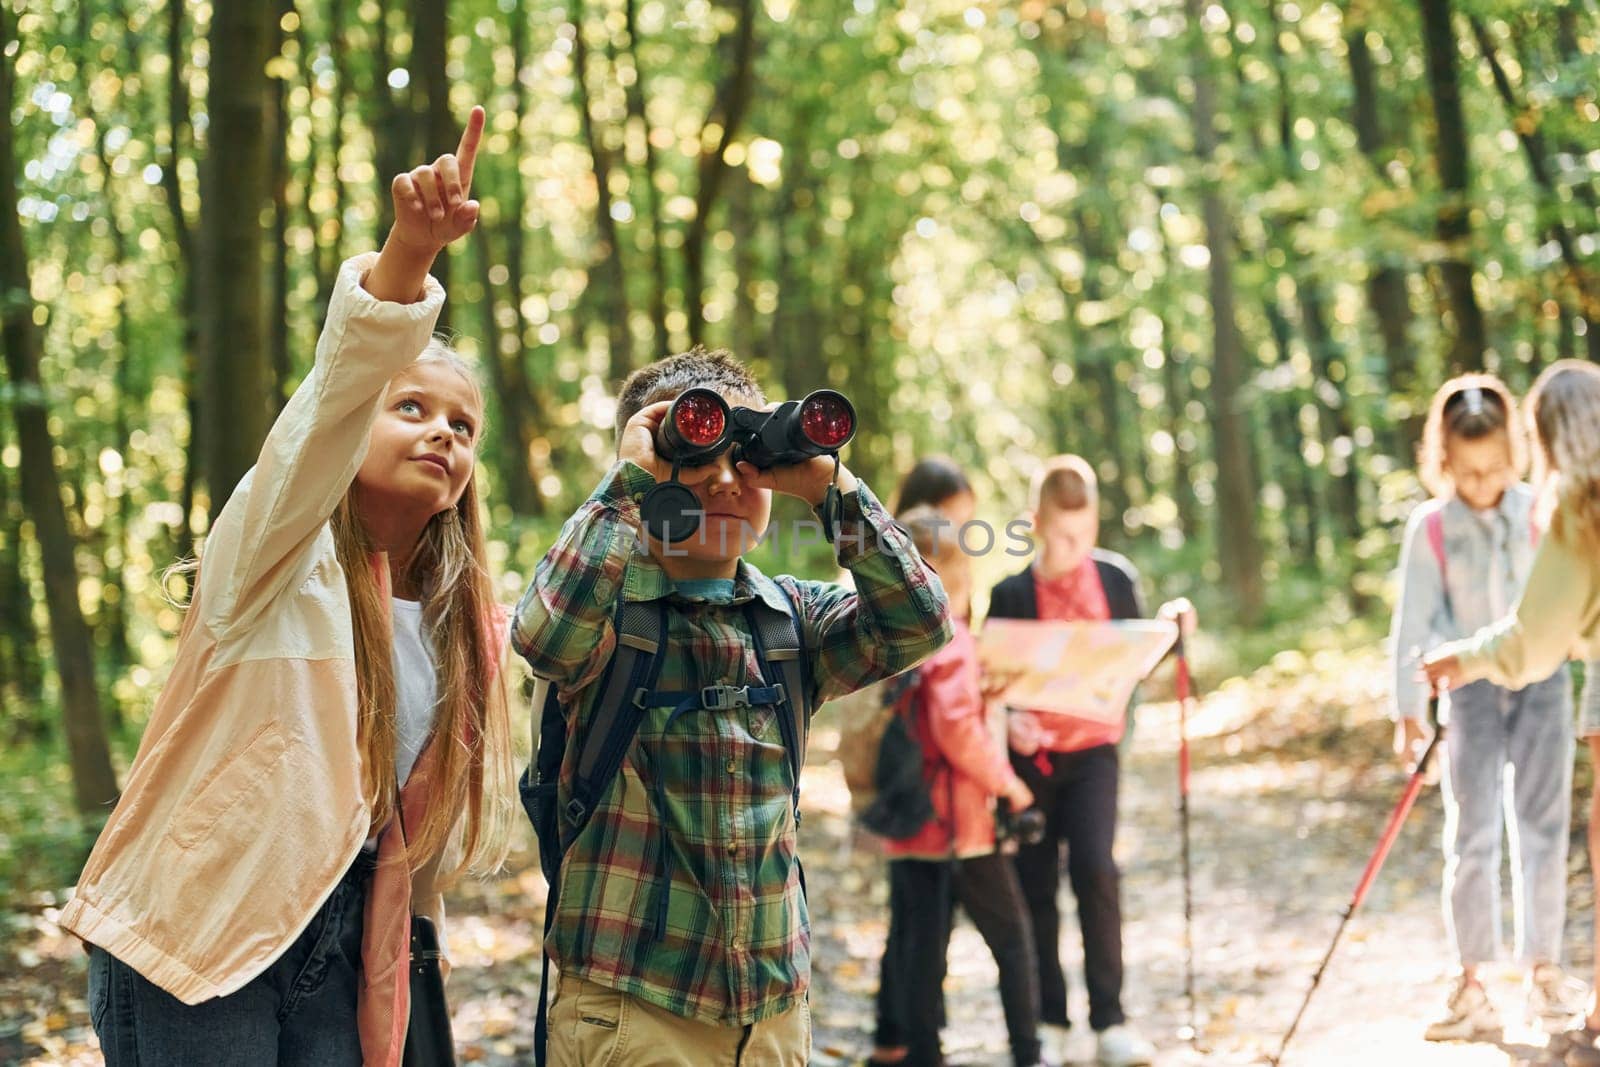 Conception of tourism. Kids in green forest at summer daytime together.